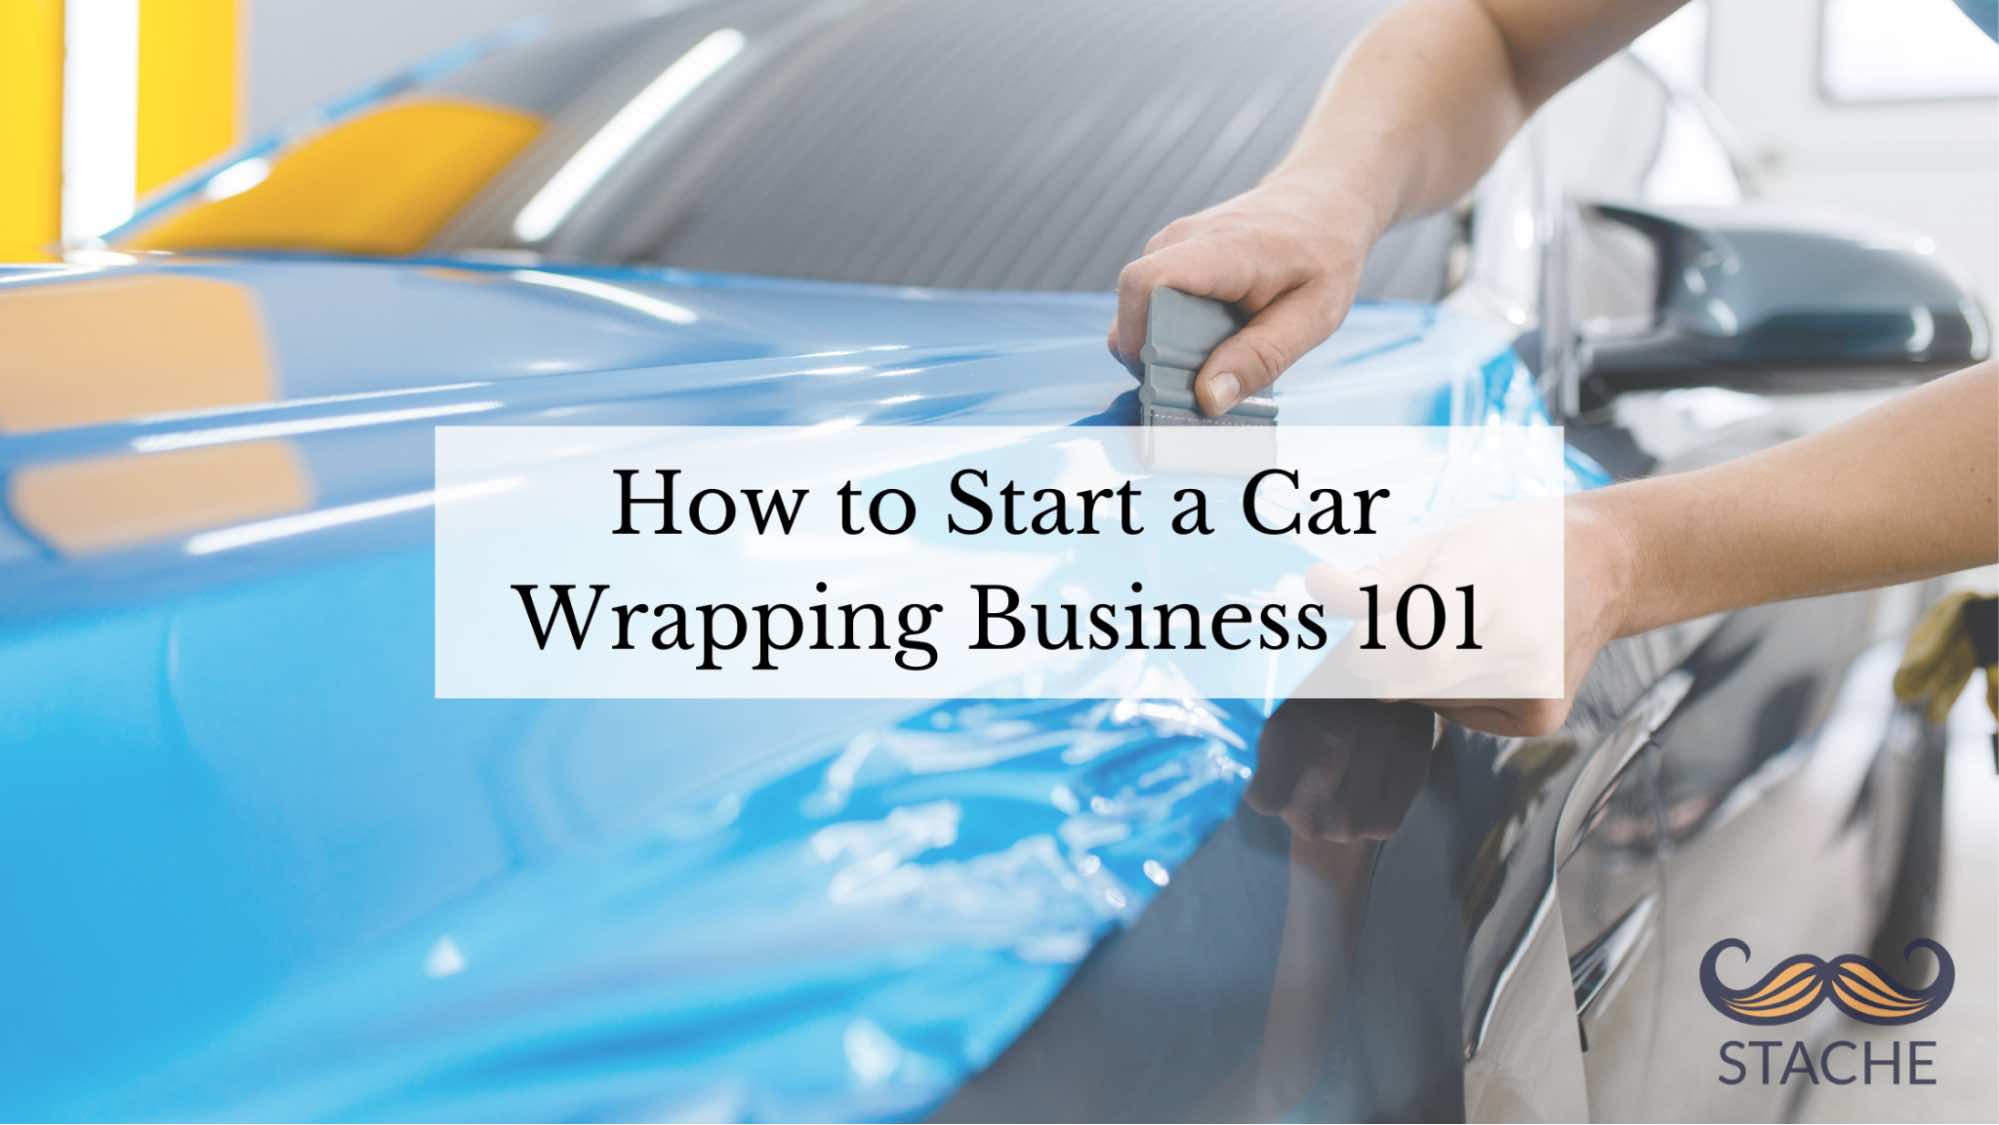 How to Start a Car Wrapping Business